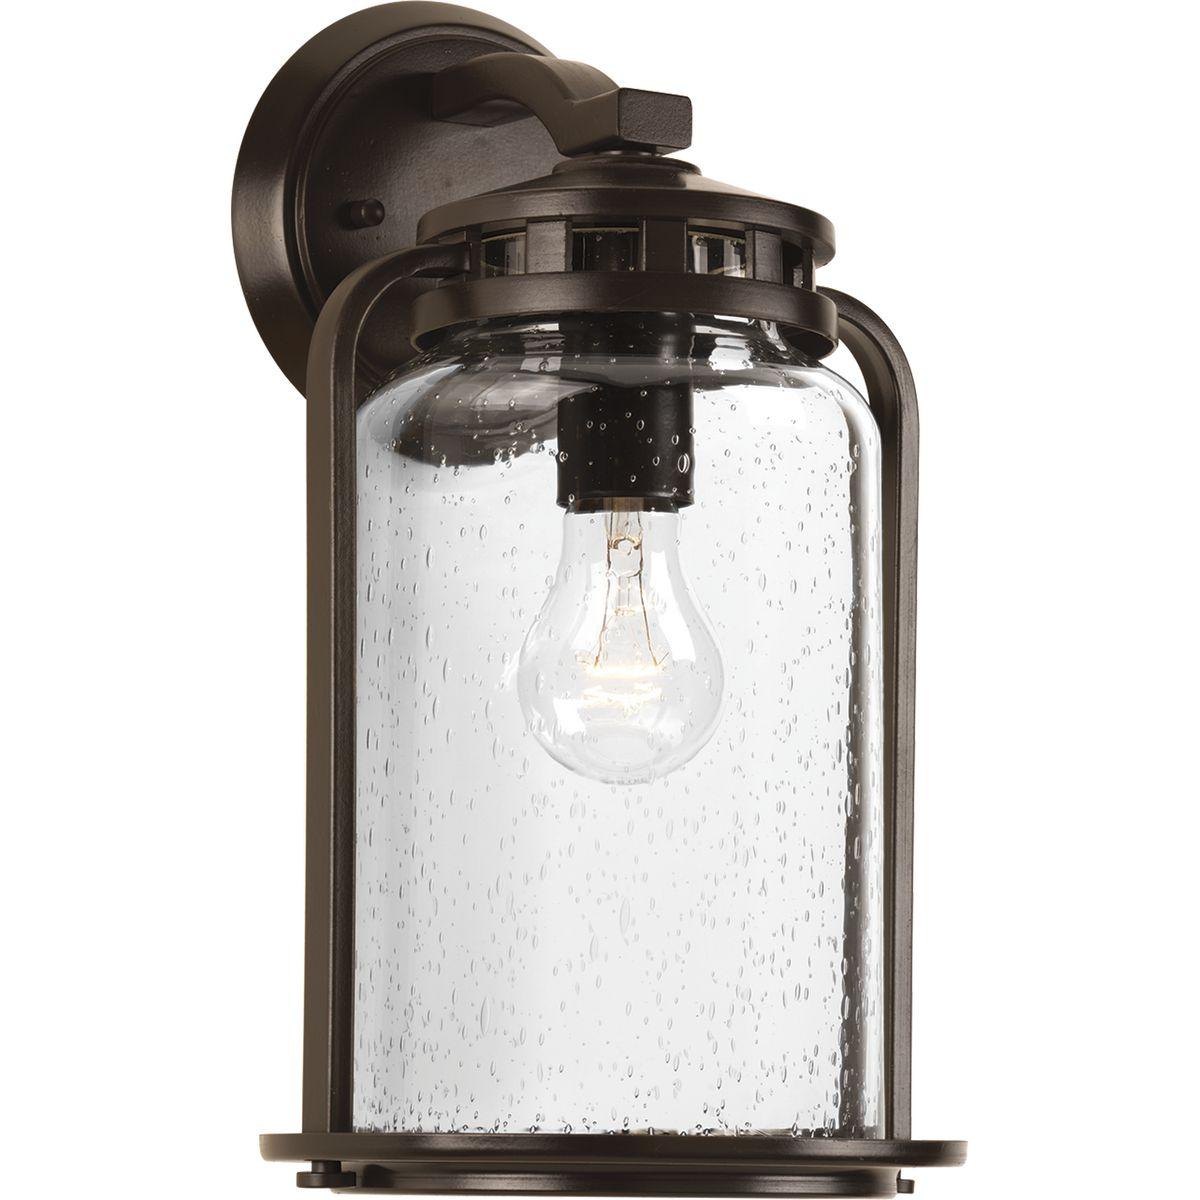 Hubbell P6050-20 The one-light medium wall lantern from the Botta Collection provides a casual feel to complement interiors and exteriors with vintage flair. Finely crafted accents highlight clear seeded glass.  ; Casual feel with vintage flair. ; Complements both interio